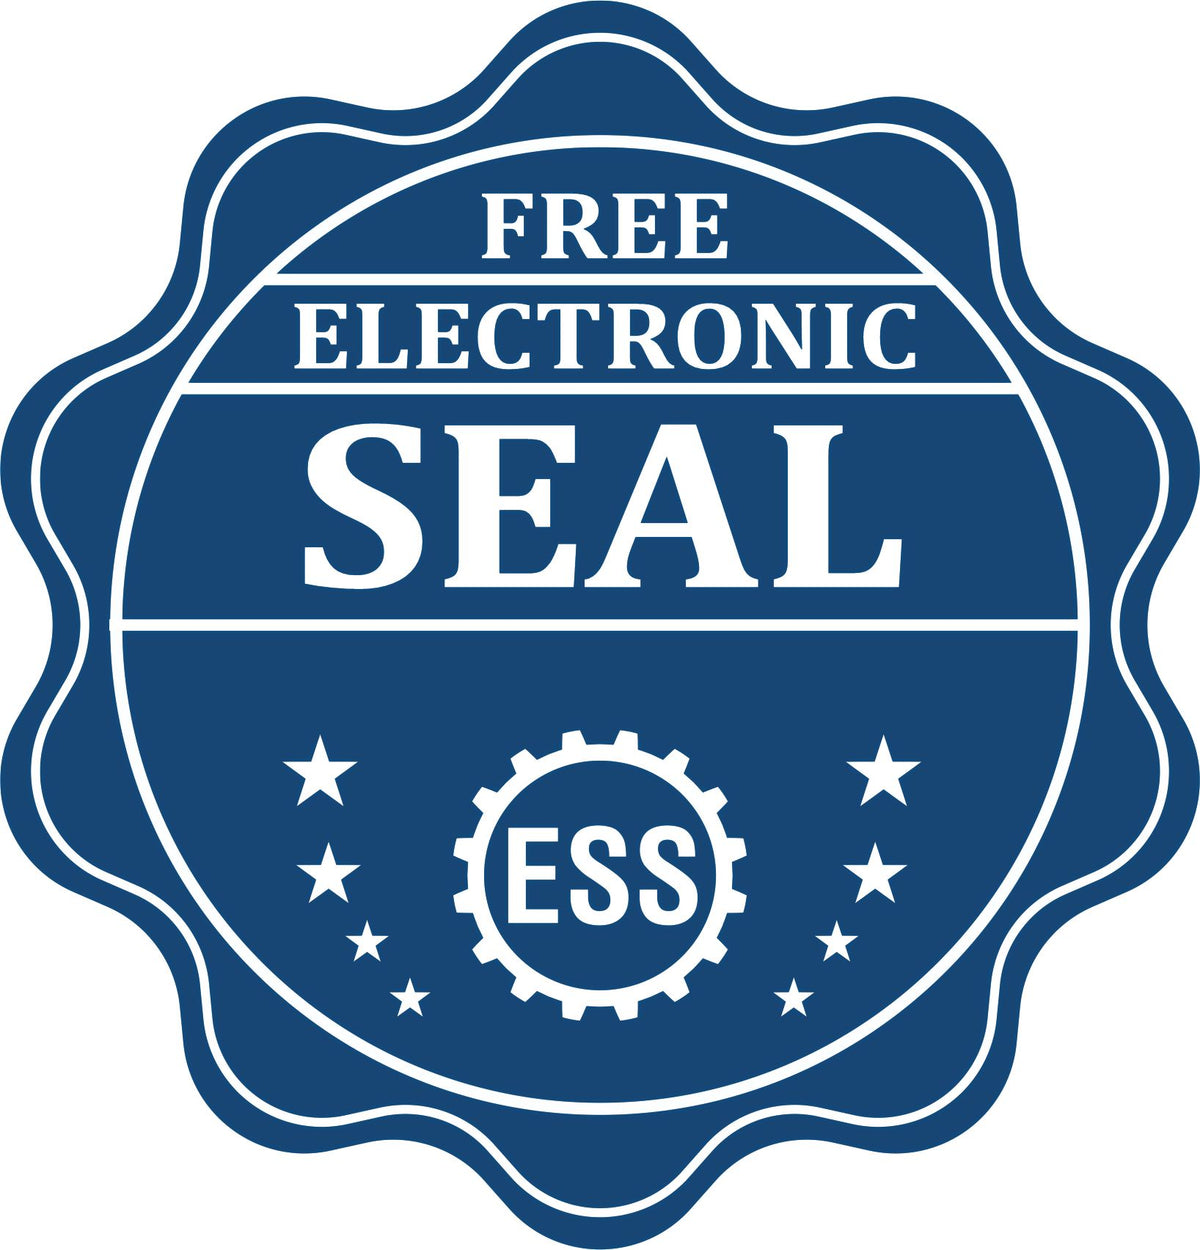 A badge showing a free electronic seal for the Heavy Duty Cast Iron Idaho Geologist Seal Embosser with stars and the ESS gear on the emblem.